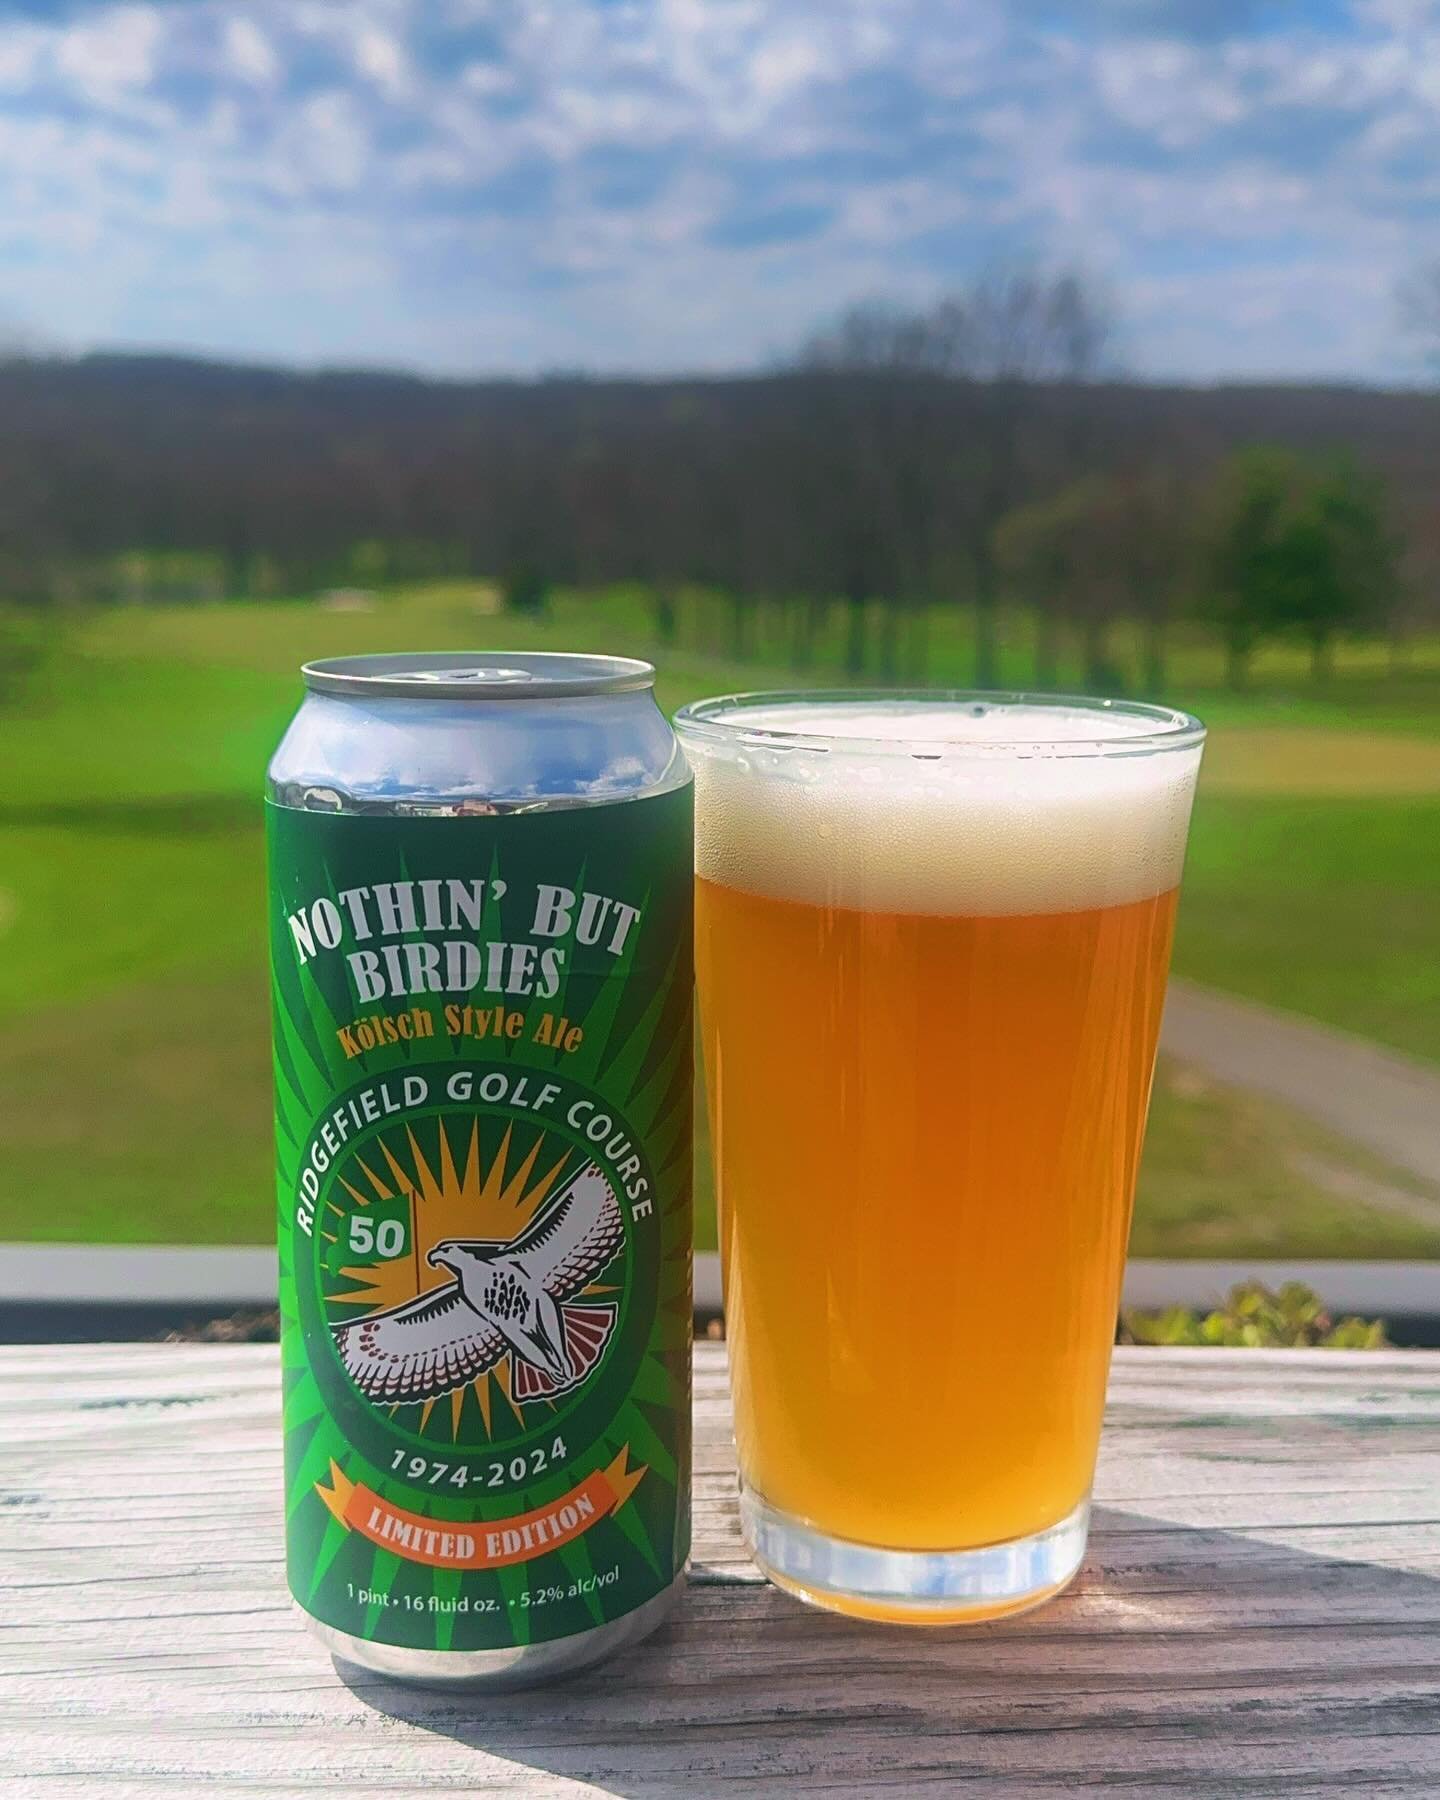 Calling all craft beer heads 🗣️

@odeensbbq_at_rgc now has a limited edition beer specially brewed for the 50th year anniversary of Ridgefield Golf Course! 🍻

That's right, you can't get it anywhere else 😉

A delicious, crisp, Kolsch style ale mad